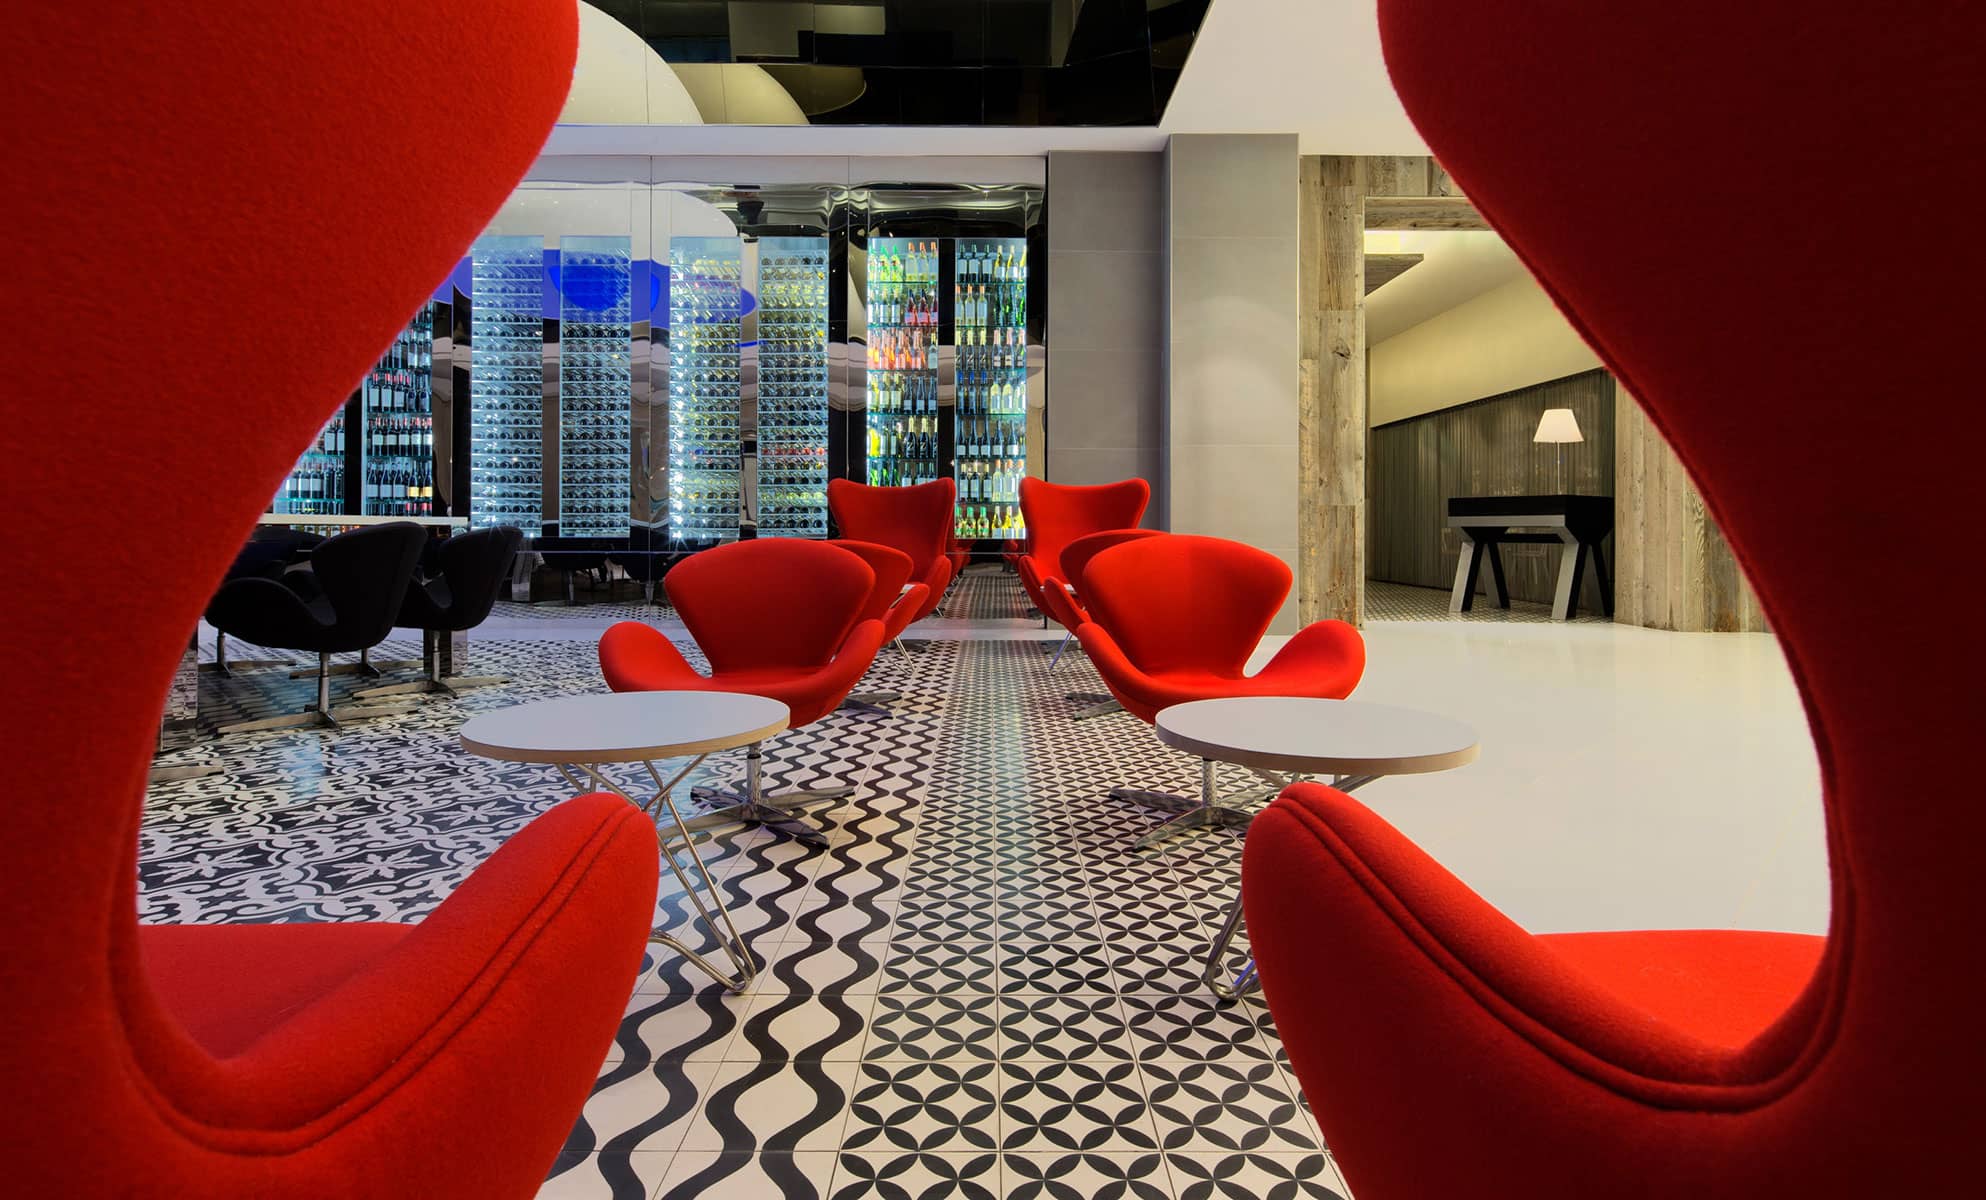 Architecture Photography USA: Red chairs in lobby of five star hotel, Minneapolis USA.